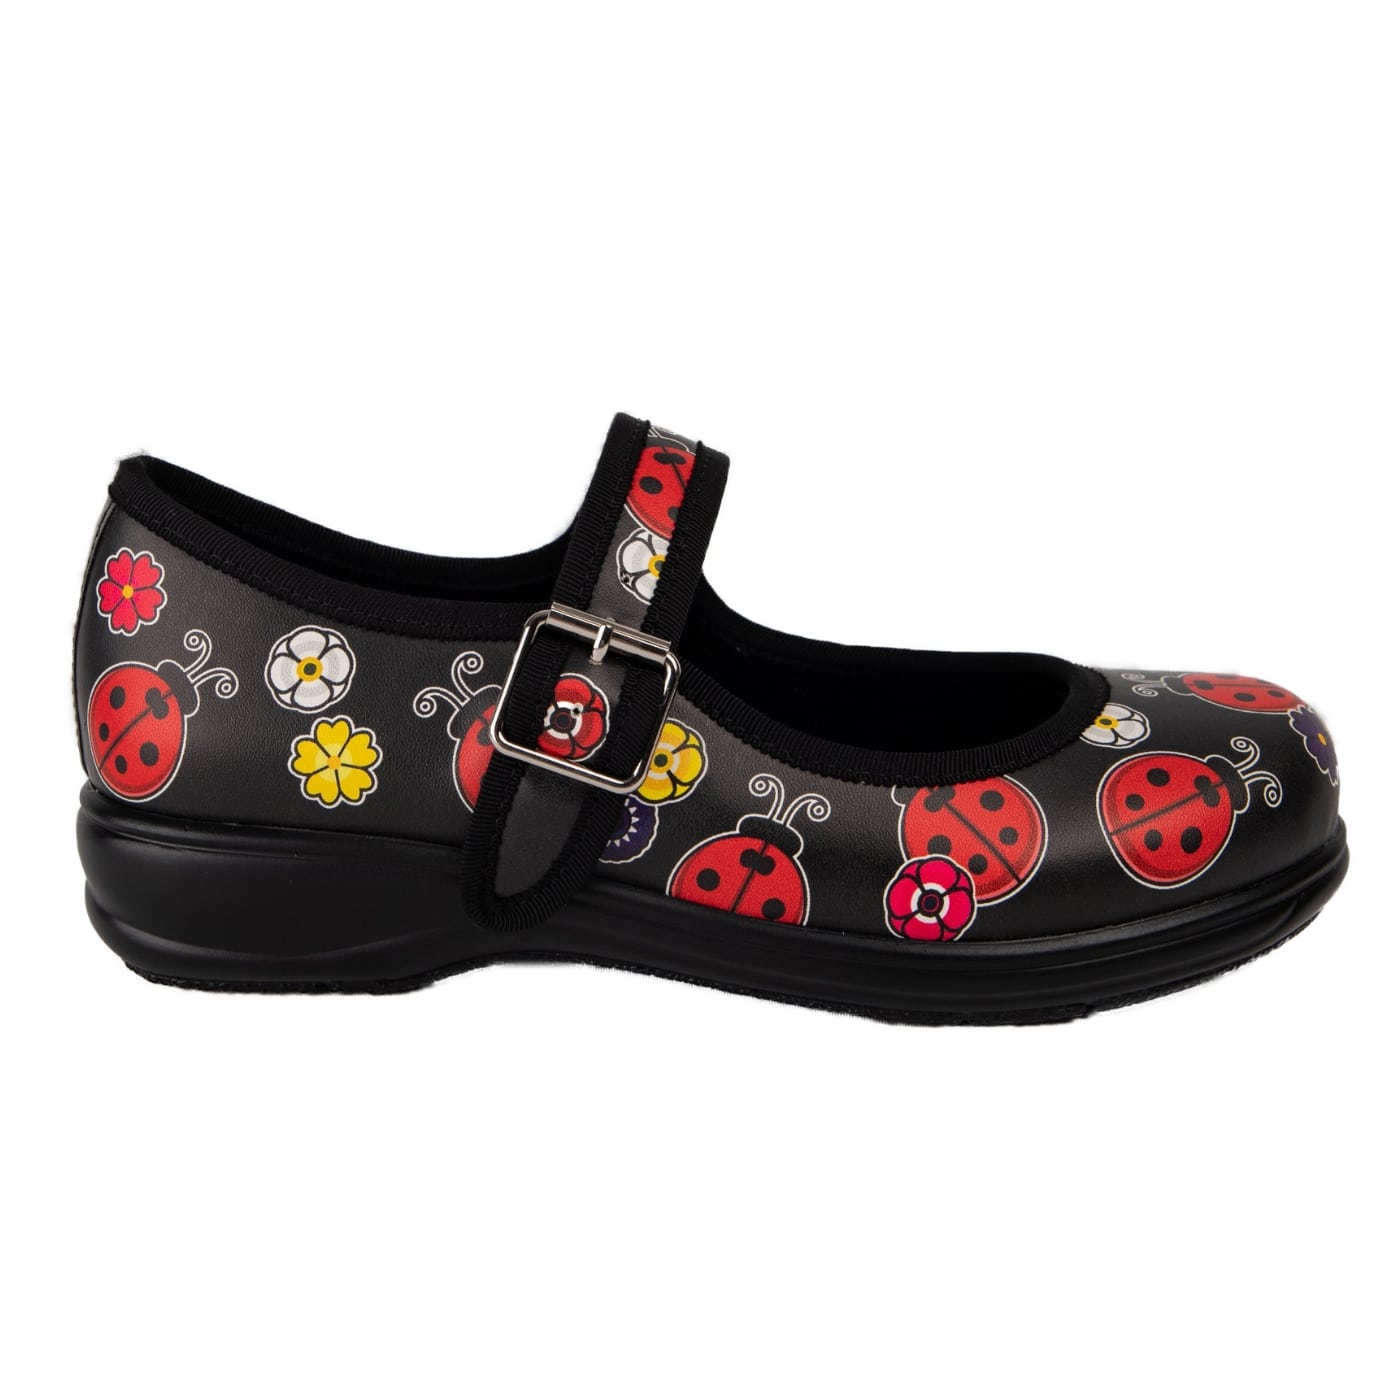 In The Garden Mary Janes by RainbowsAndFairies.com.au (Bees - Ladybug - Butterfly - Mismtached Shoes - Pair & Spare - 3 Shoes - Cute) - SKU: FW_MARYJ_INGARD_ORG - Pic-07